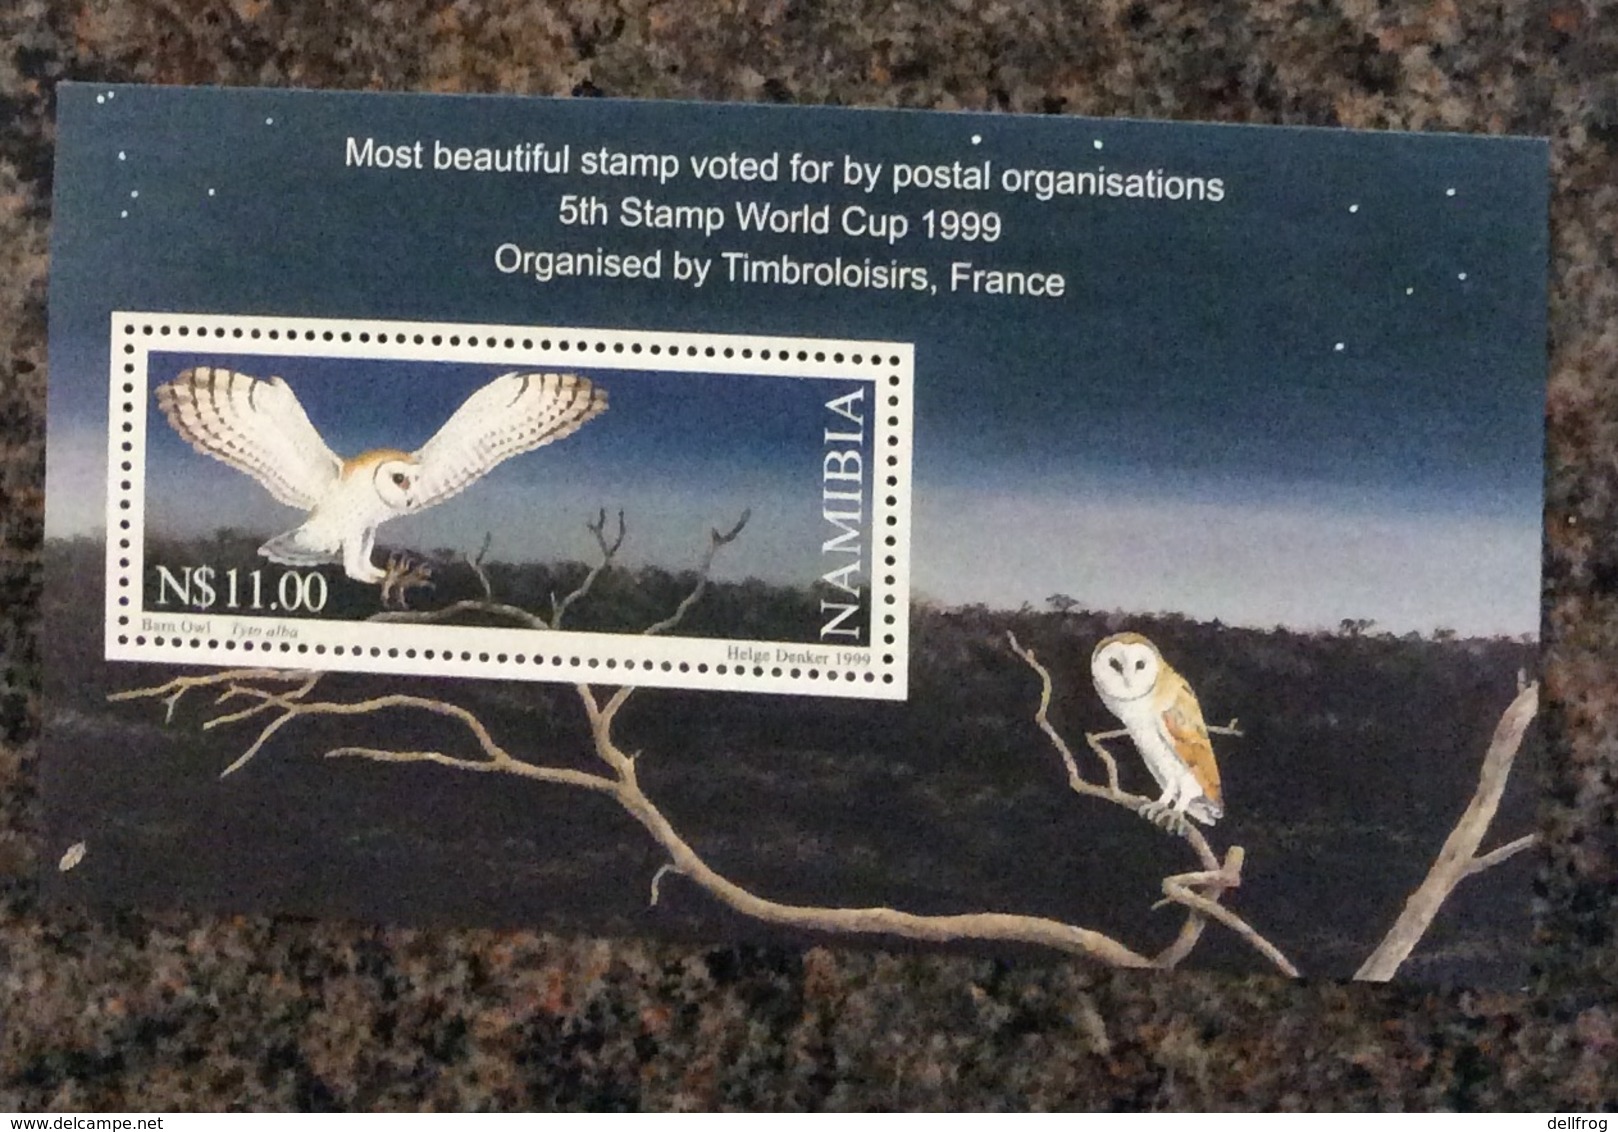 Namibia 1999 Barn Owl Sheet Stamp World Cup France MNH - Owls